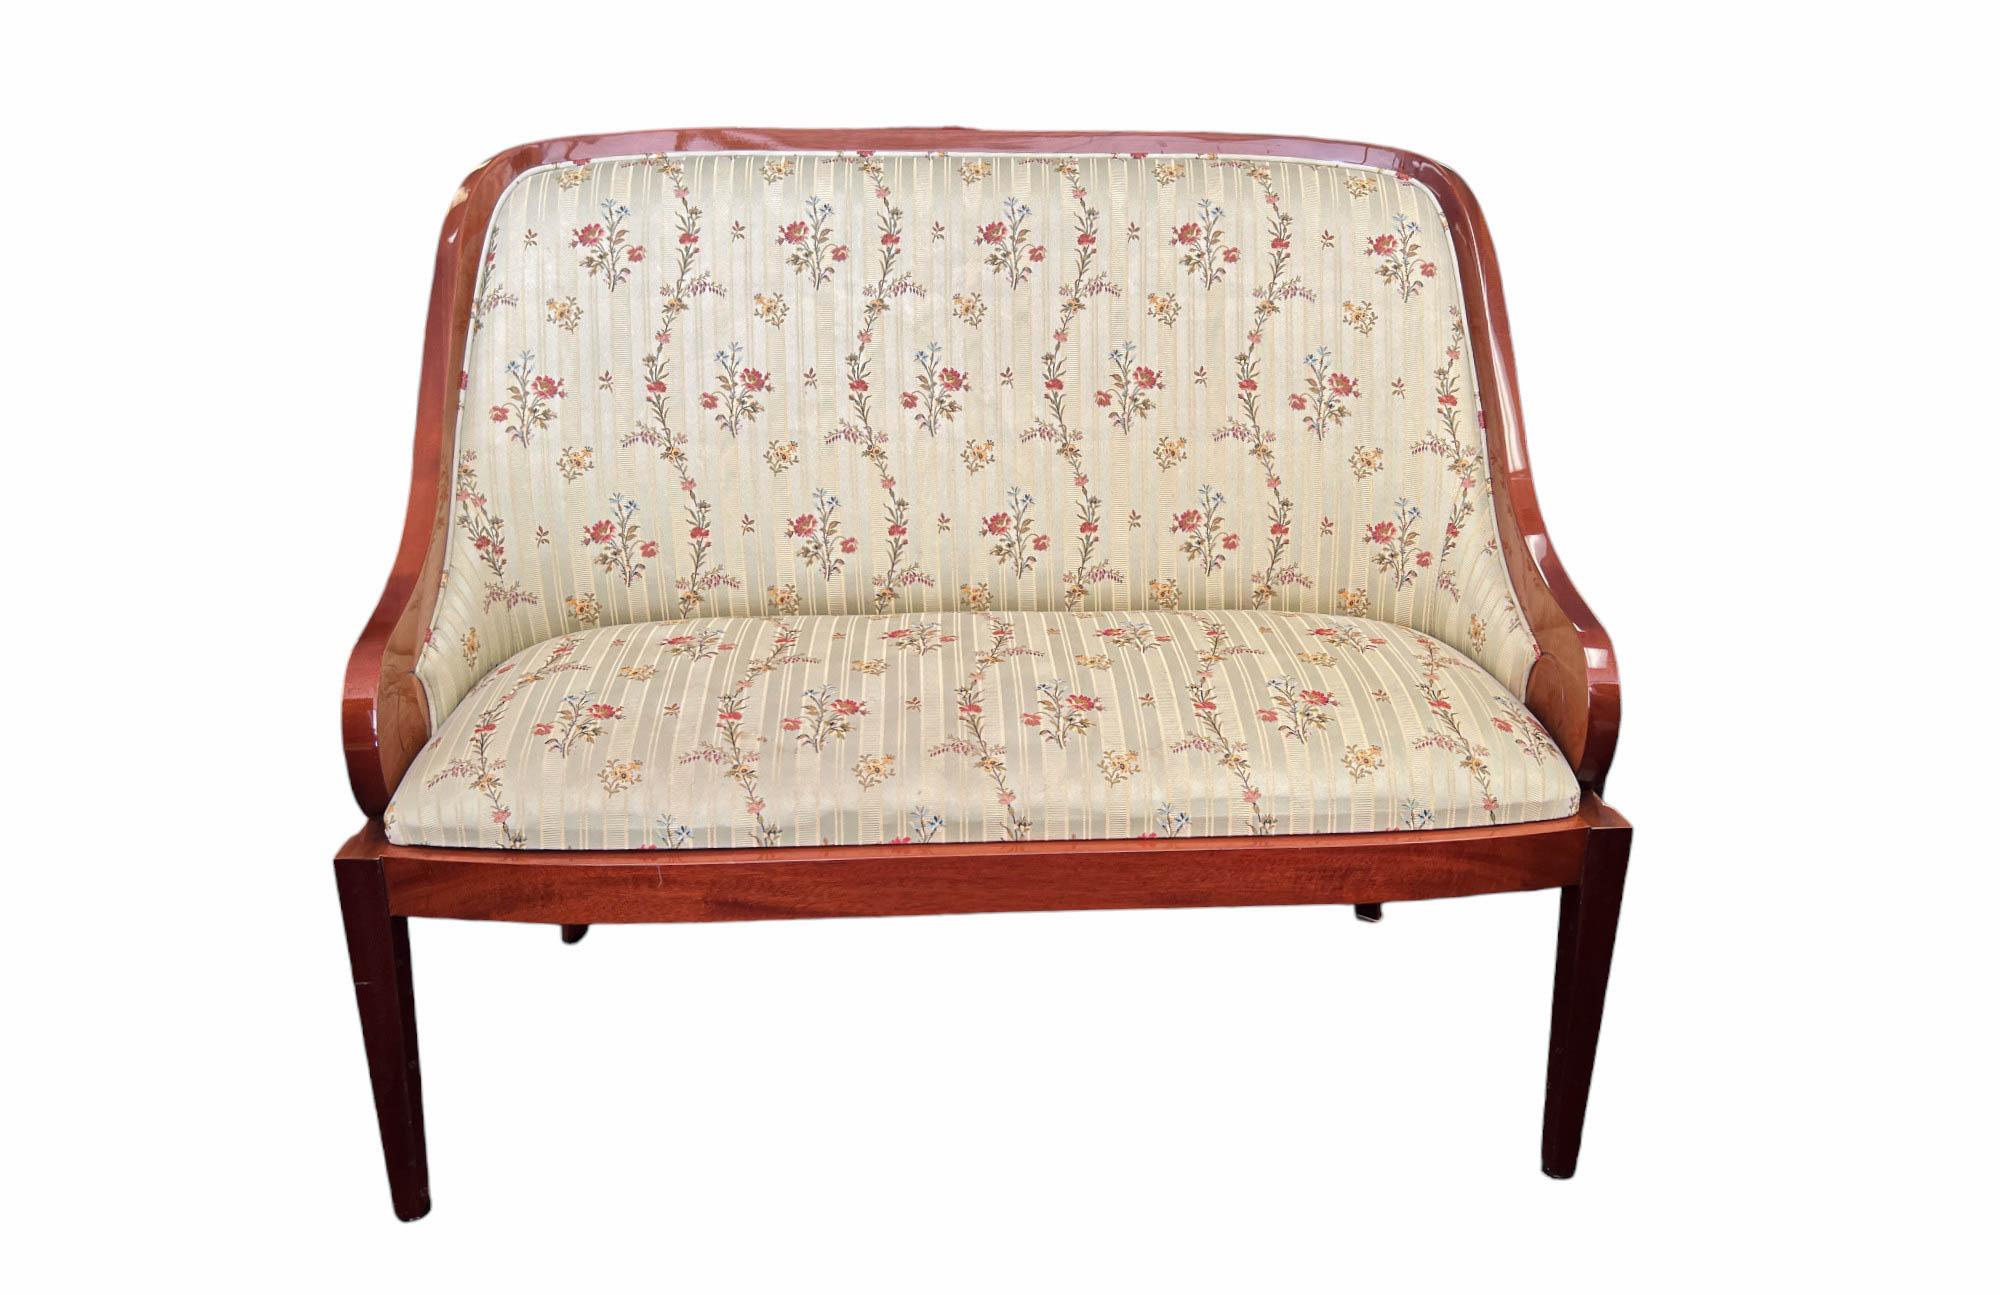 Presenting a magnificent English art deco pair of benches/loveseats, custom handcrafted, featuring flame mahogany veneer in a high gloss finish. The benches are upholstered in a subtly striped pale green textile with a delicate floral pattern. The